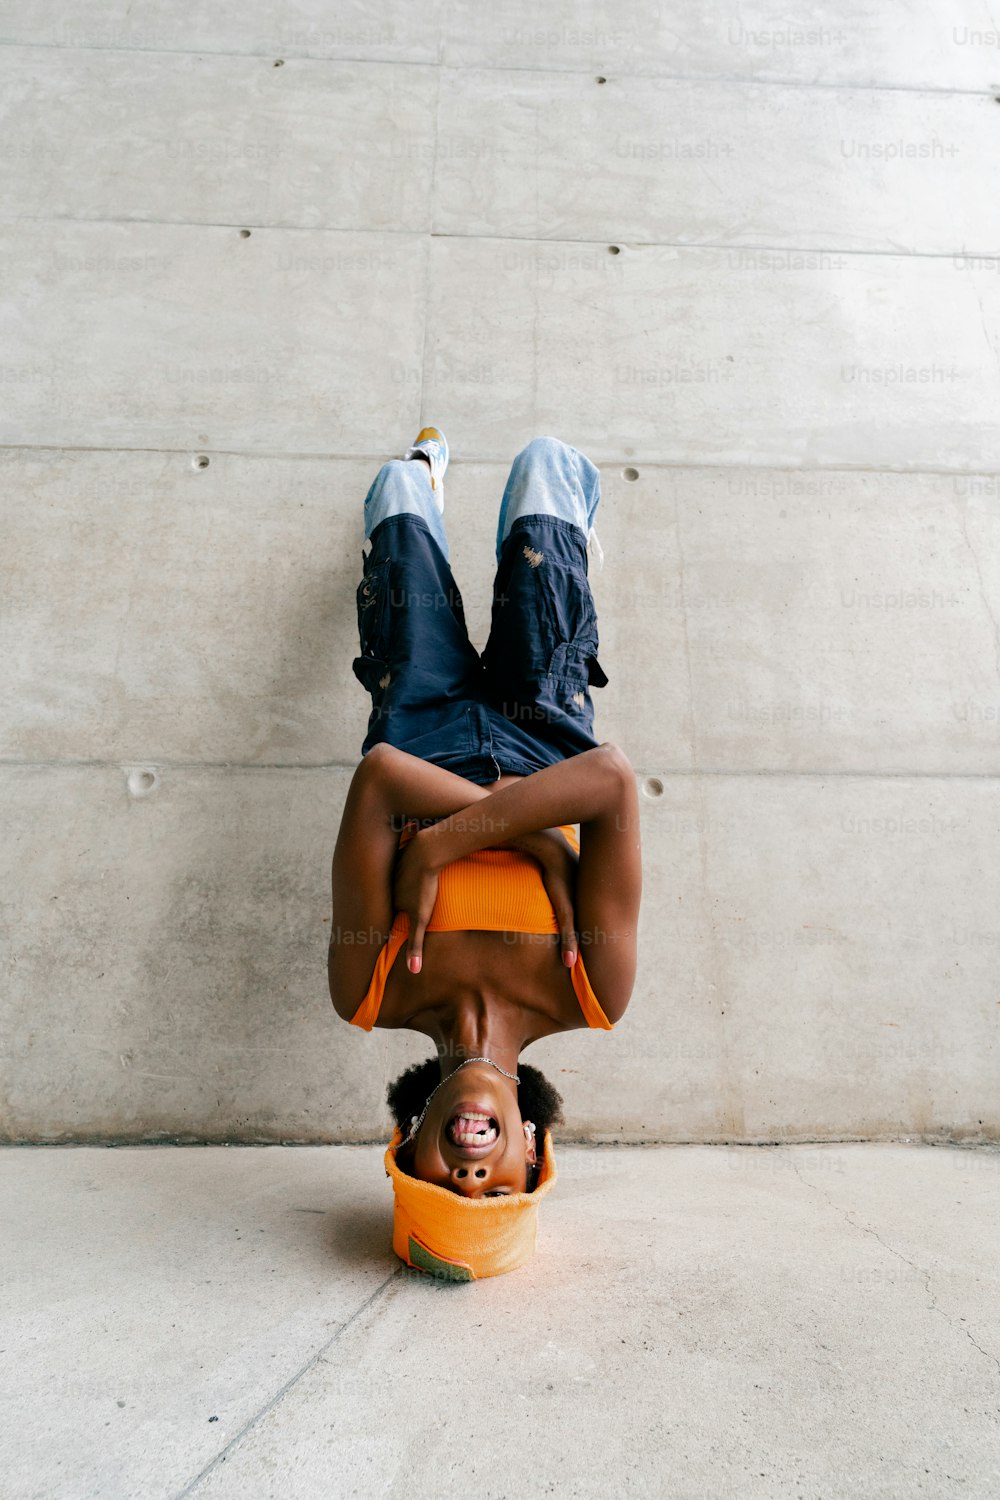 a person upside down on a yellow object